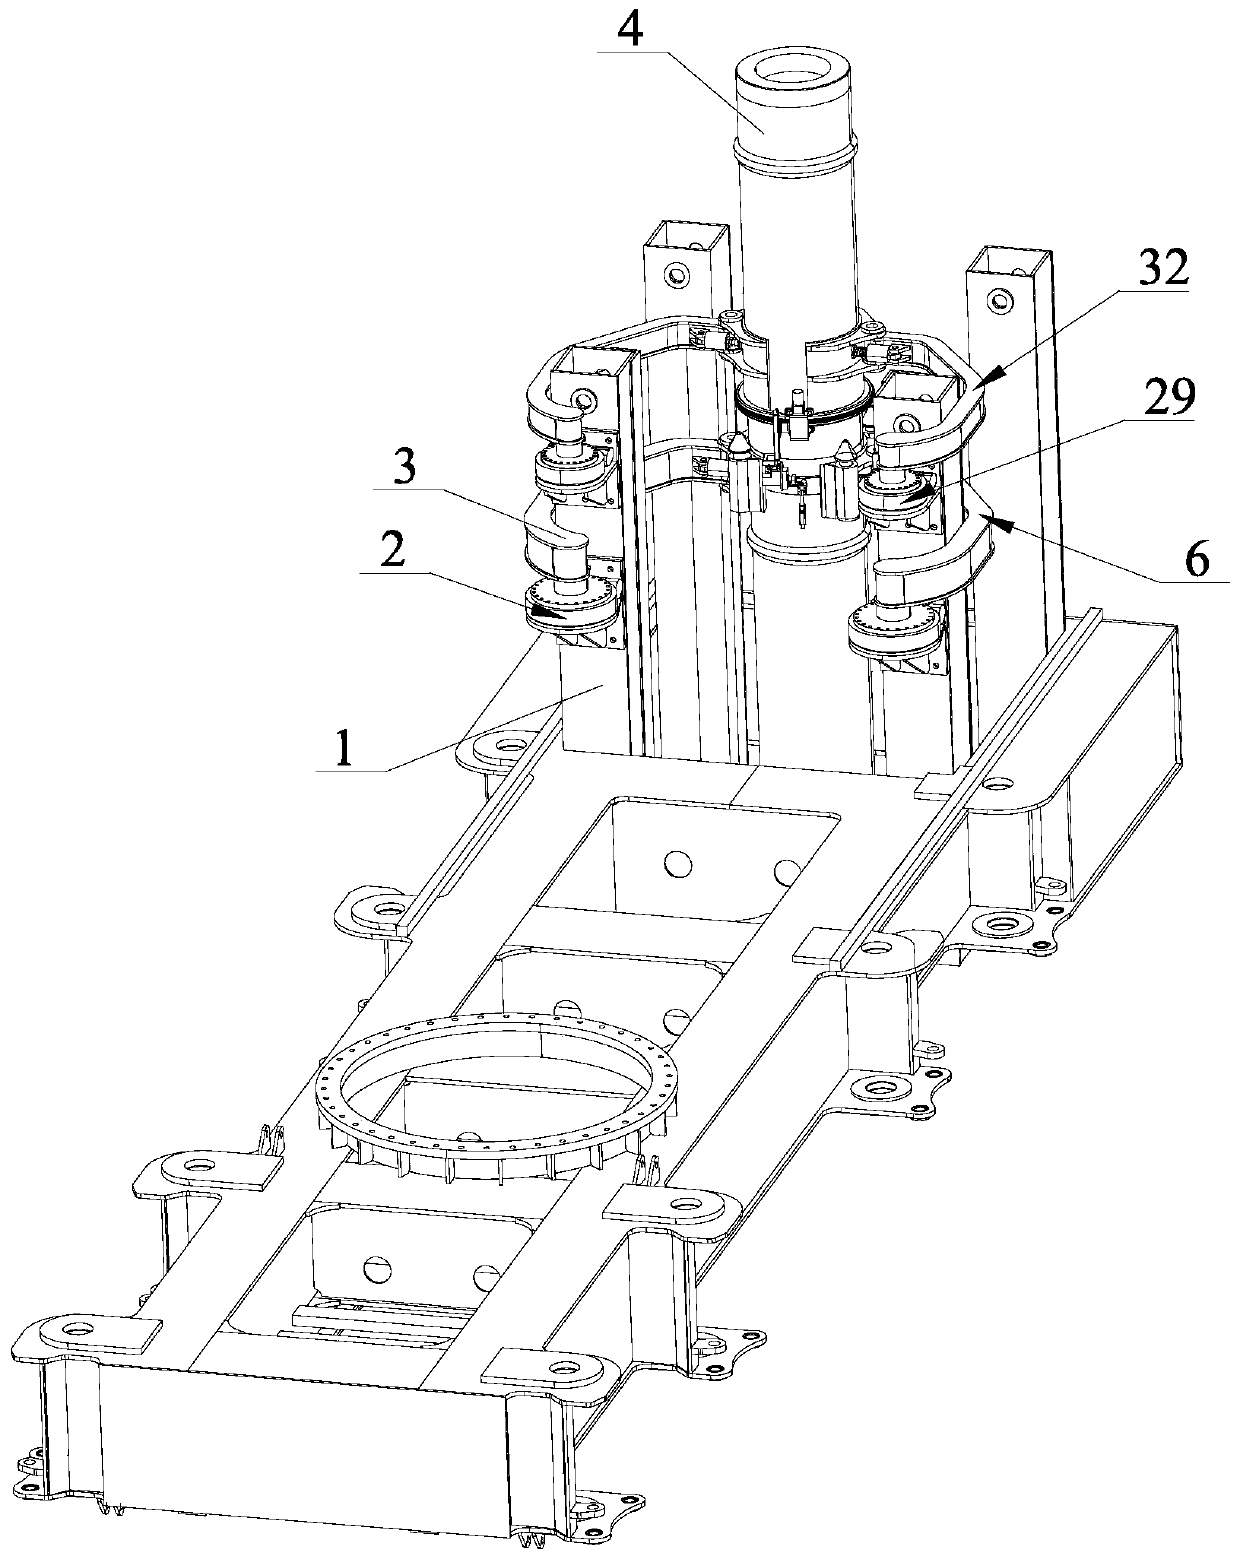 Device for aligning concentricity and carrying out automatic welding during planted pile butt joint